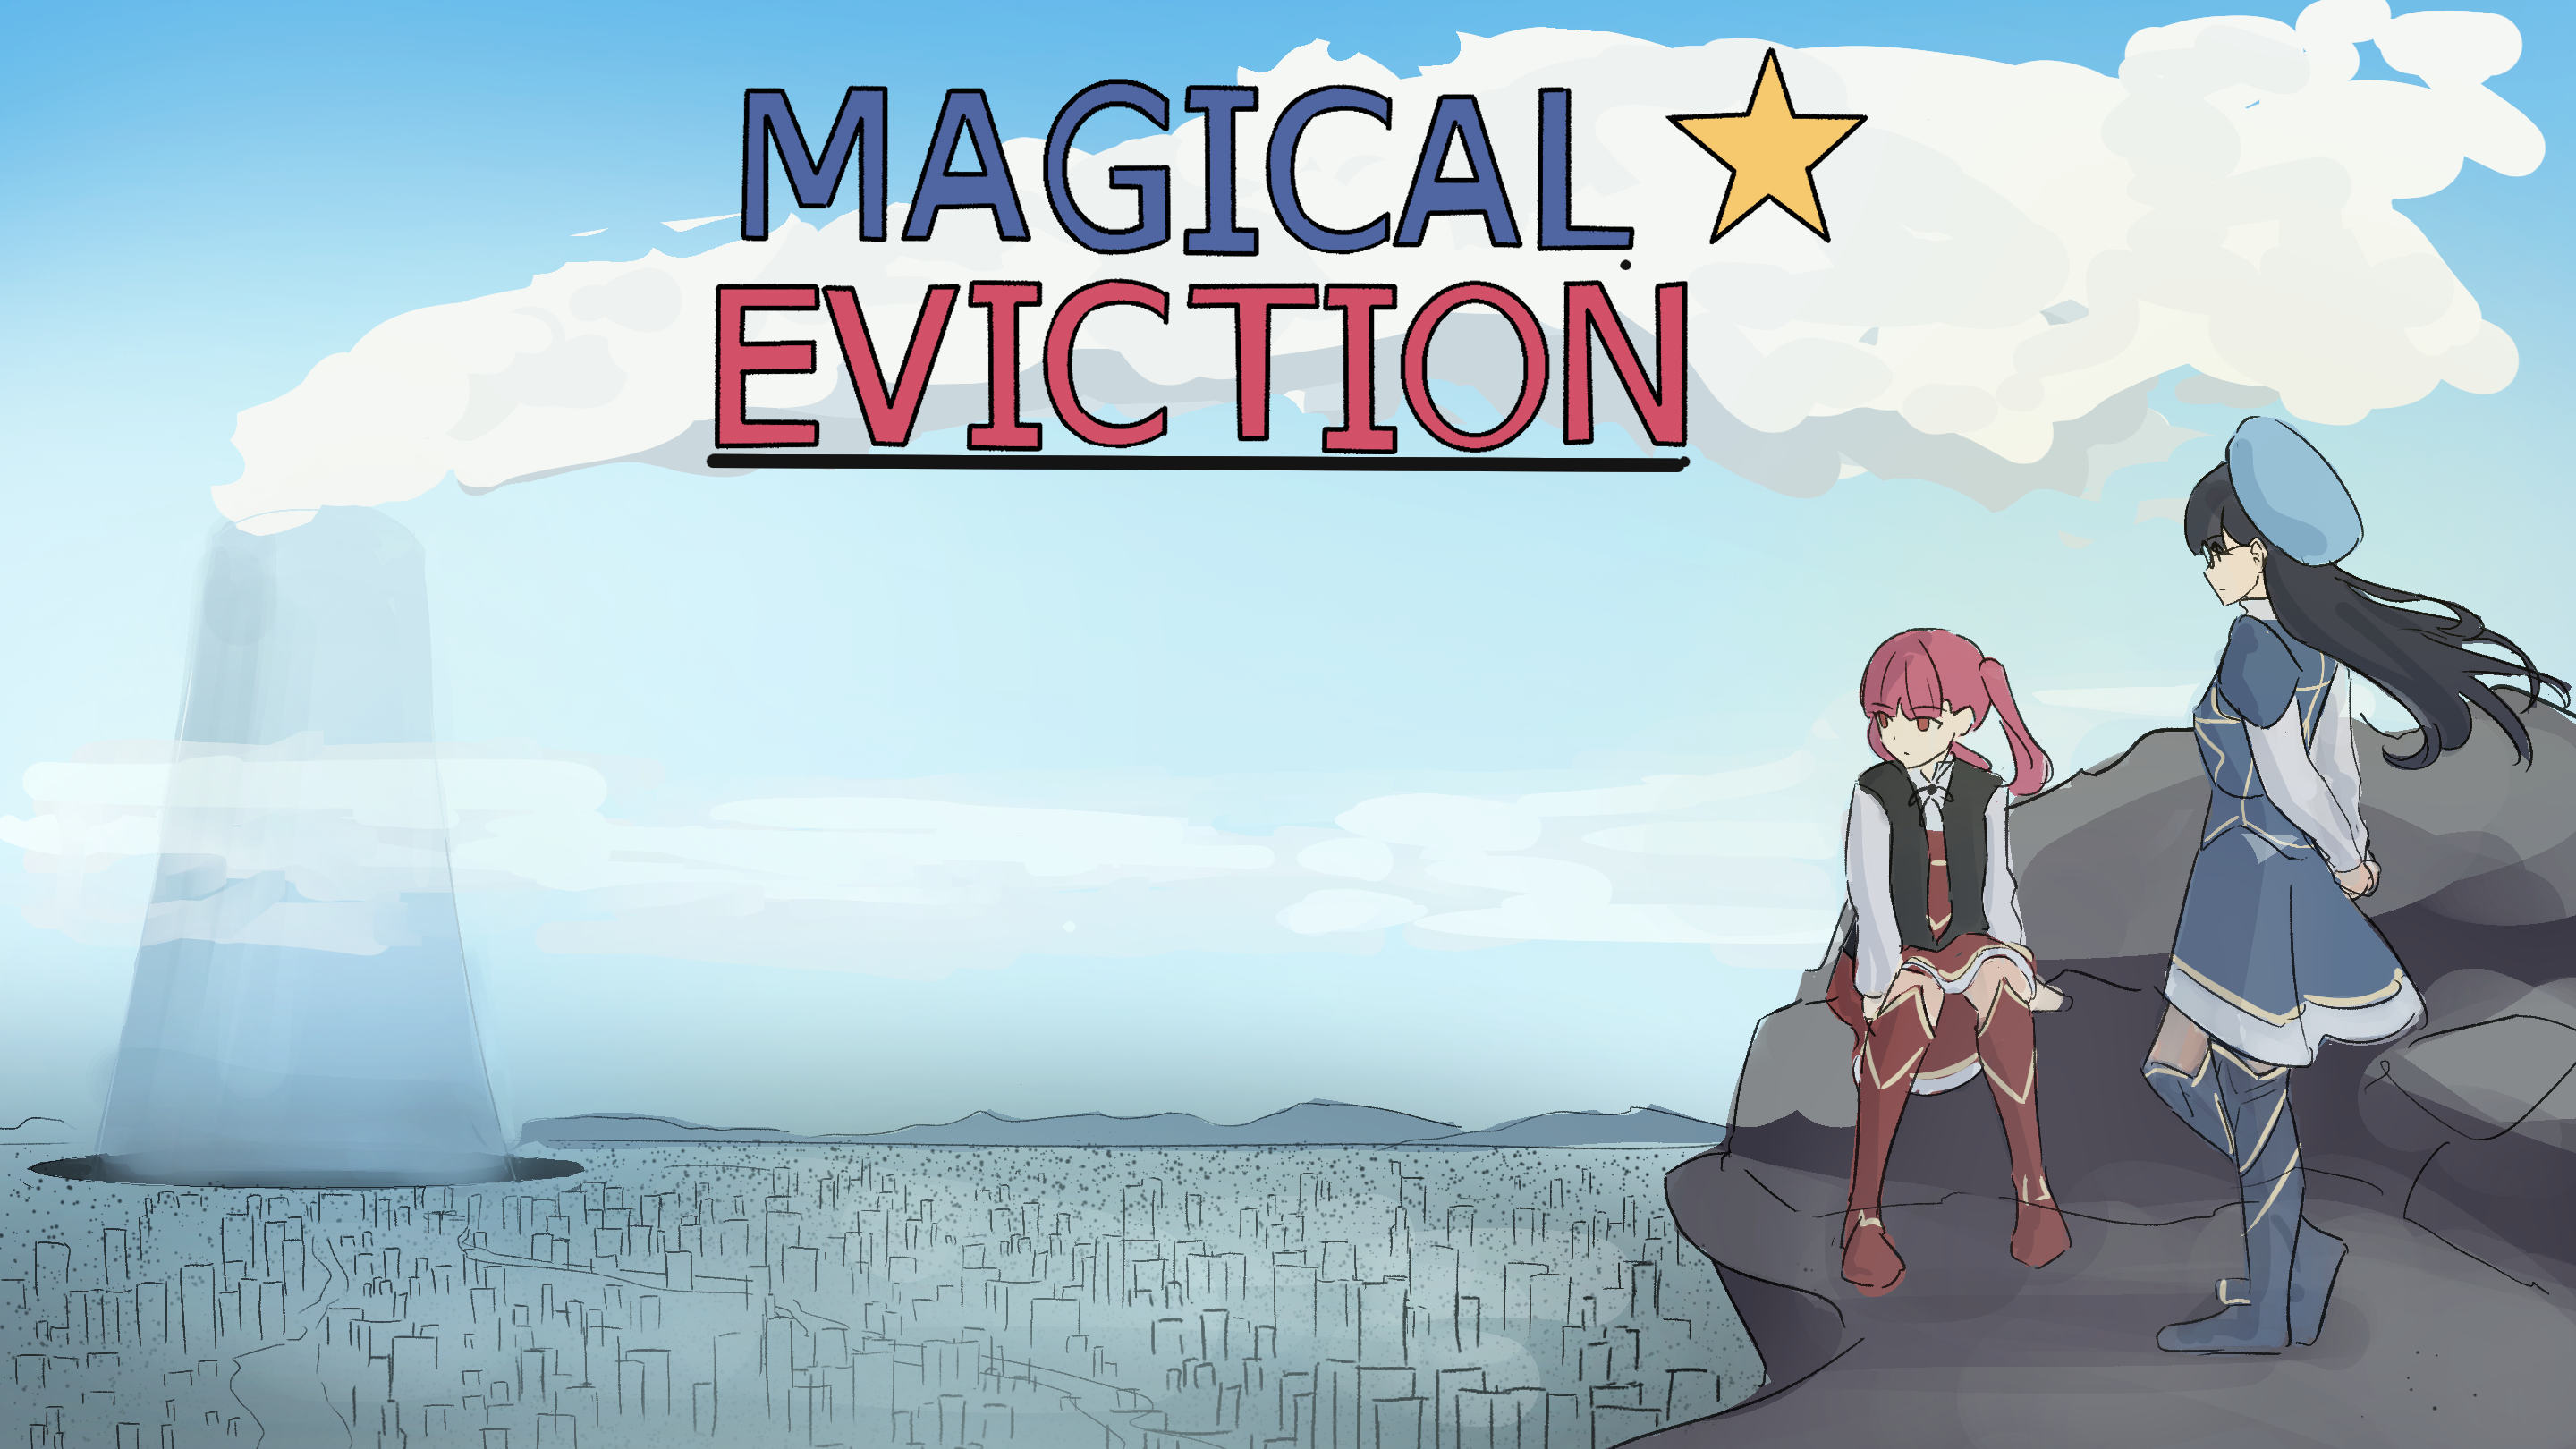 Magical Eviction